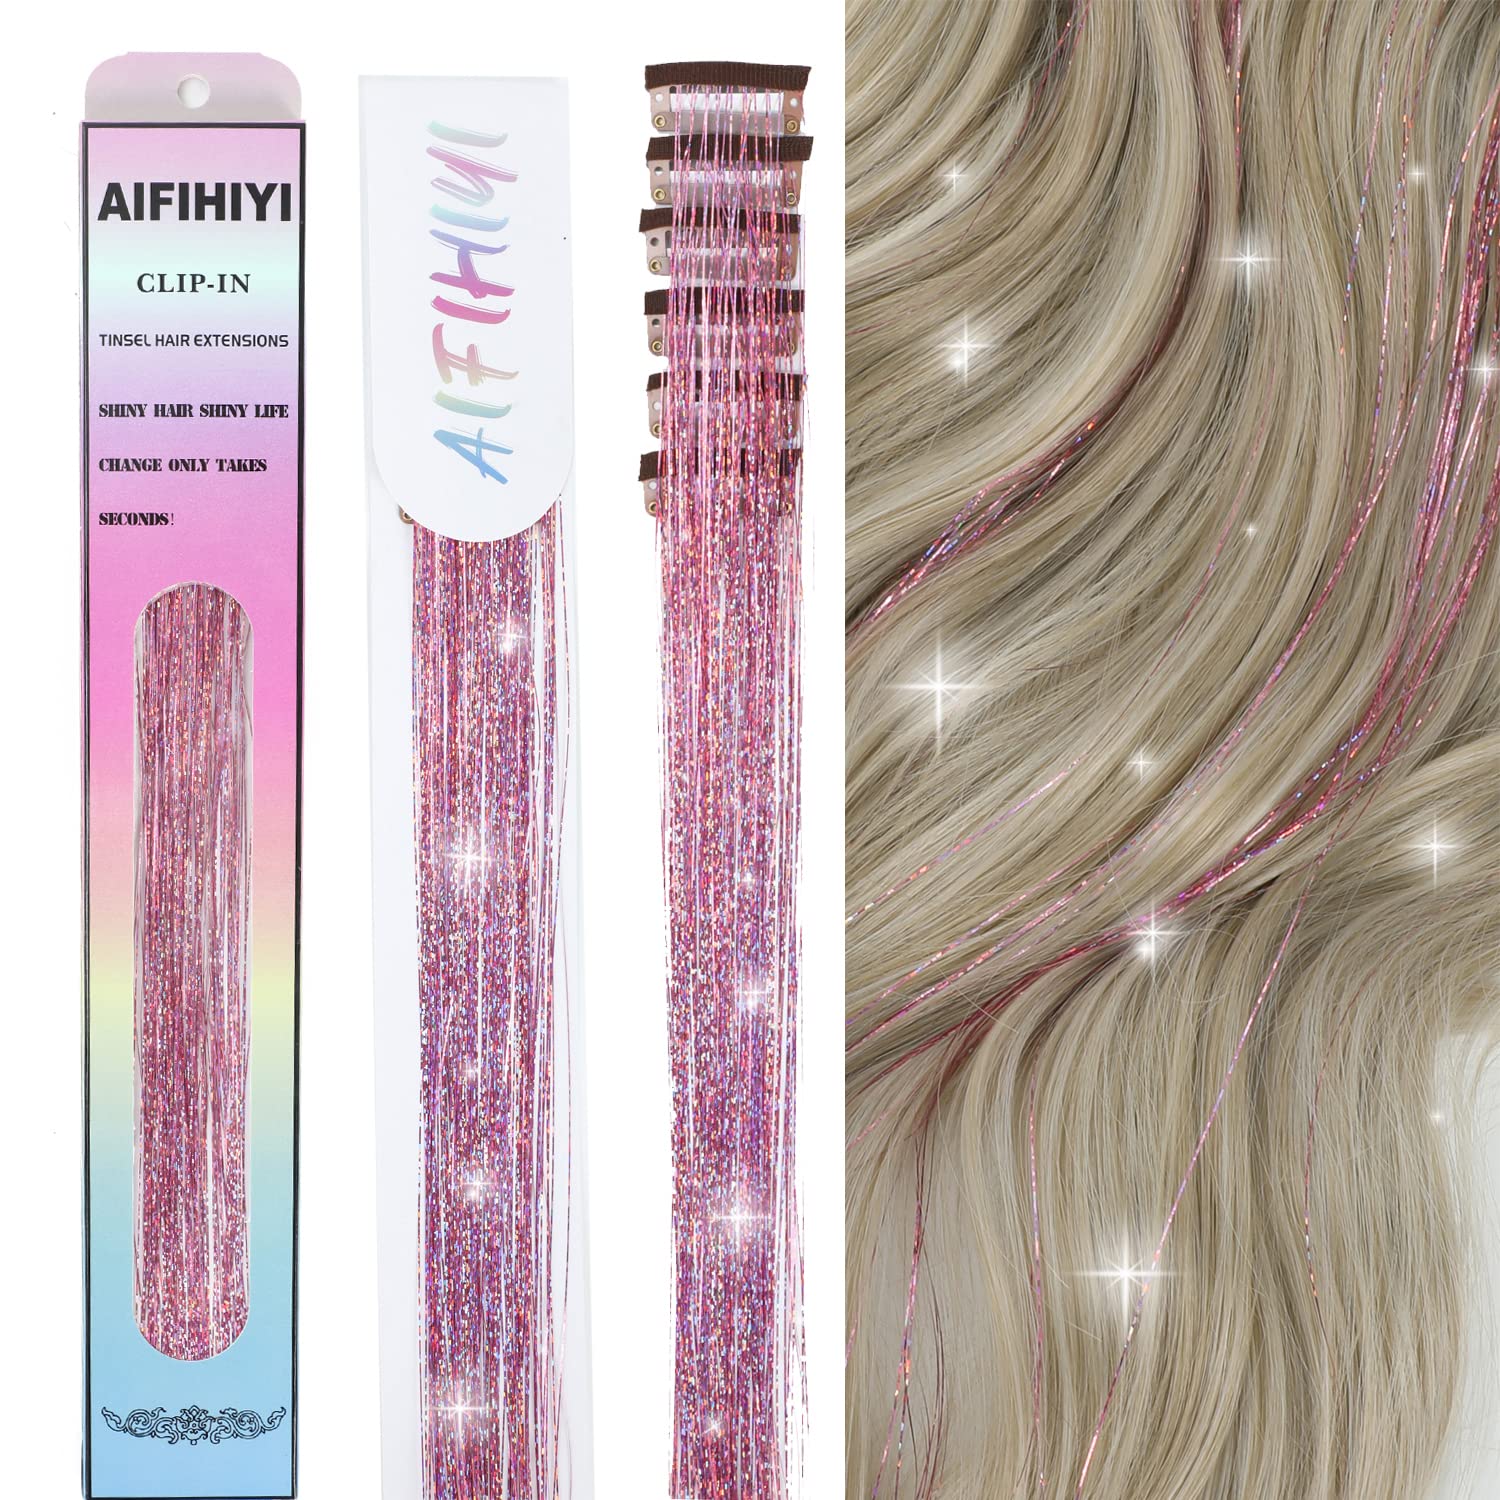 6 Pieces Clip Hair Synthetic 24 Inch Fairy Hair Tinsel Extensions, Glitter Hair  Tensile Clip Shiny Colorful for Women Girls - AliExpress